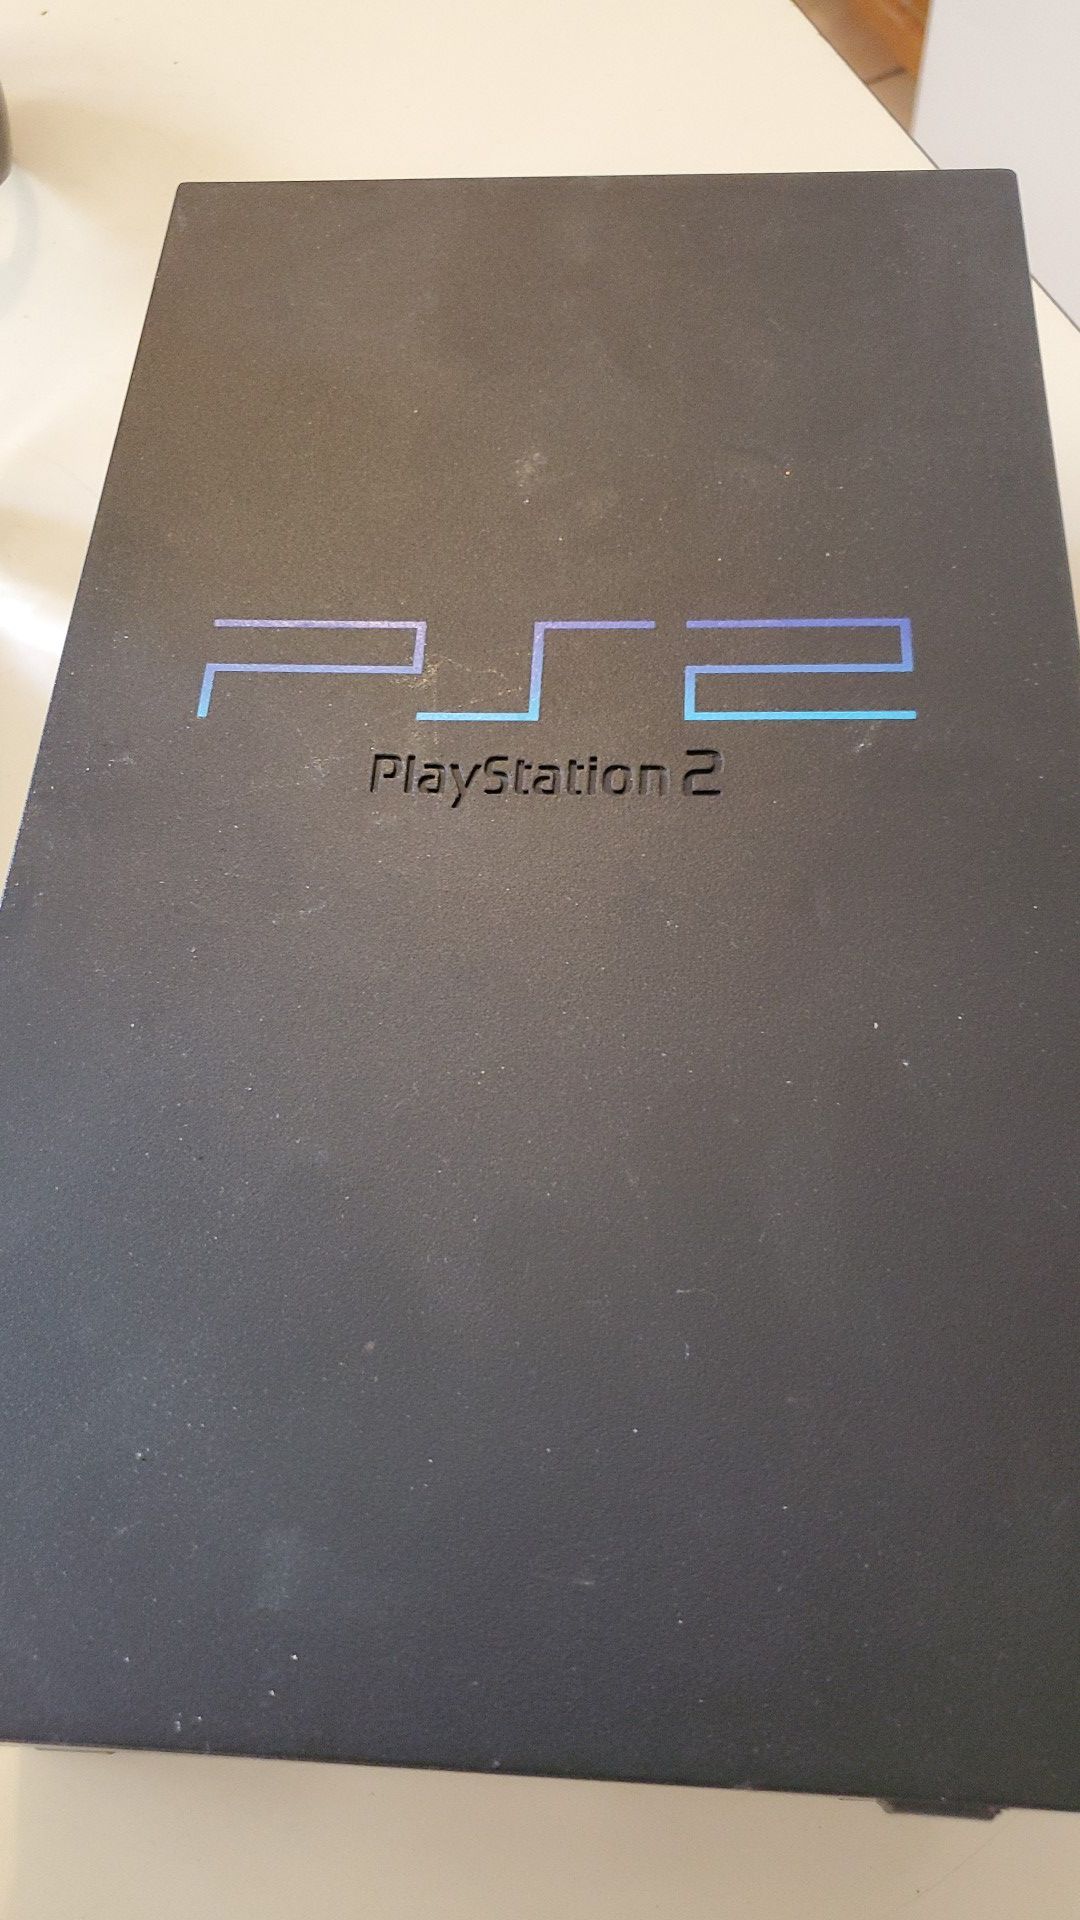 Sony Playstation 2 PS2 Video Game Console complete